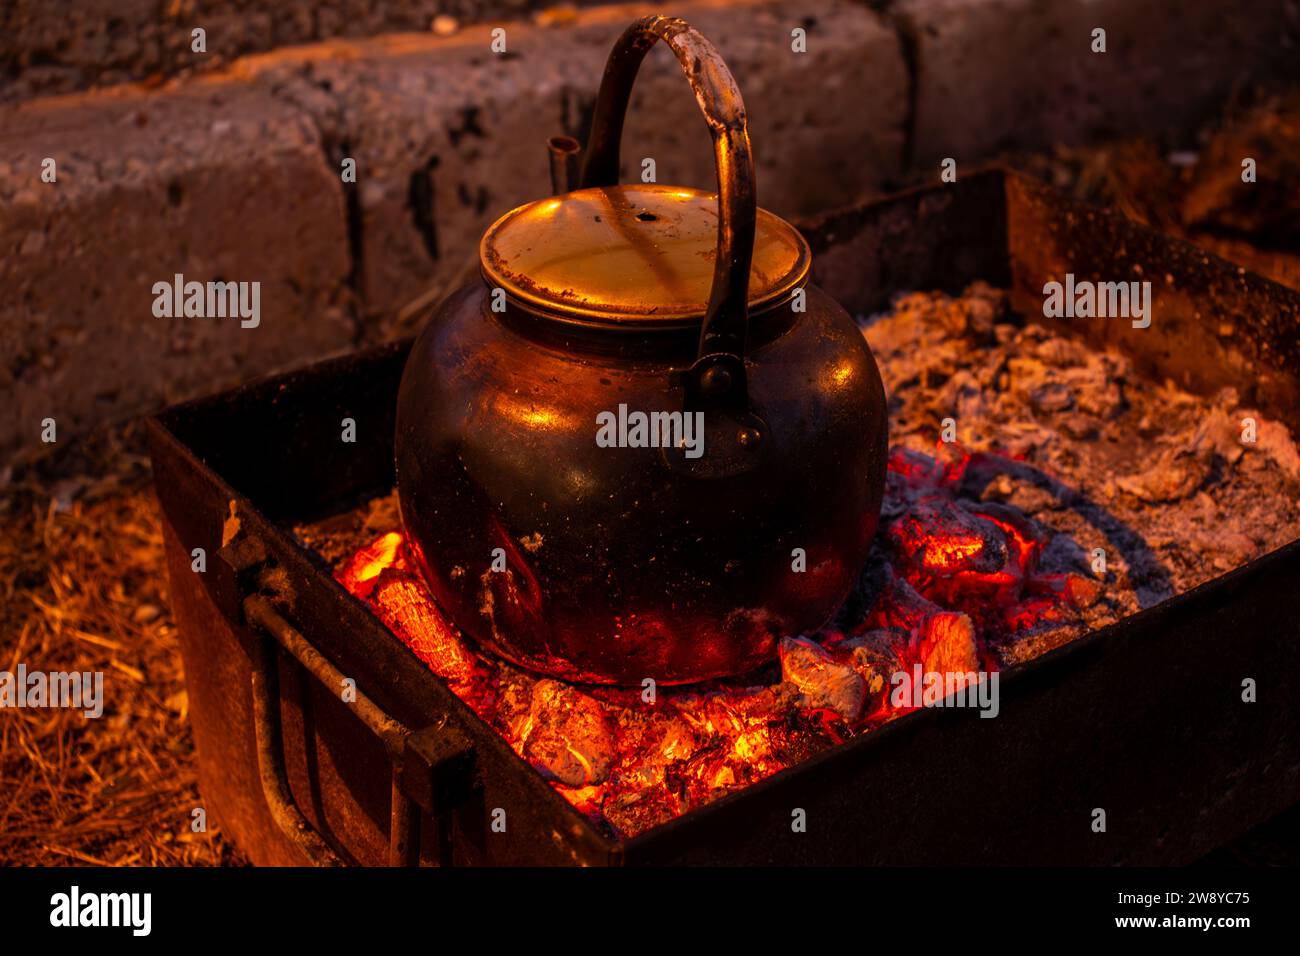 burning coals to boil water during camping and metal stove on picnic Stock Photo